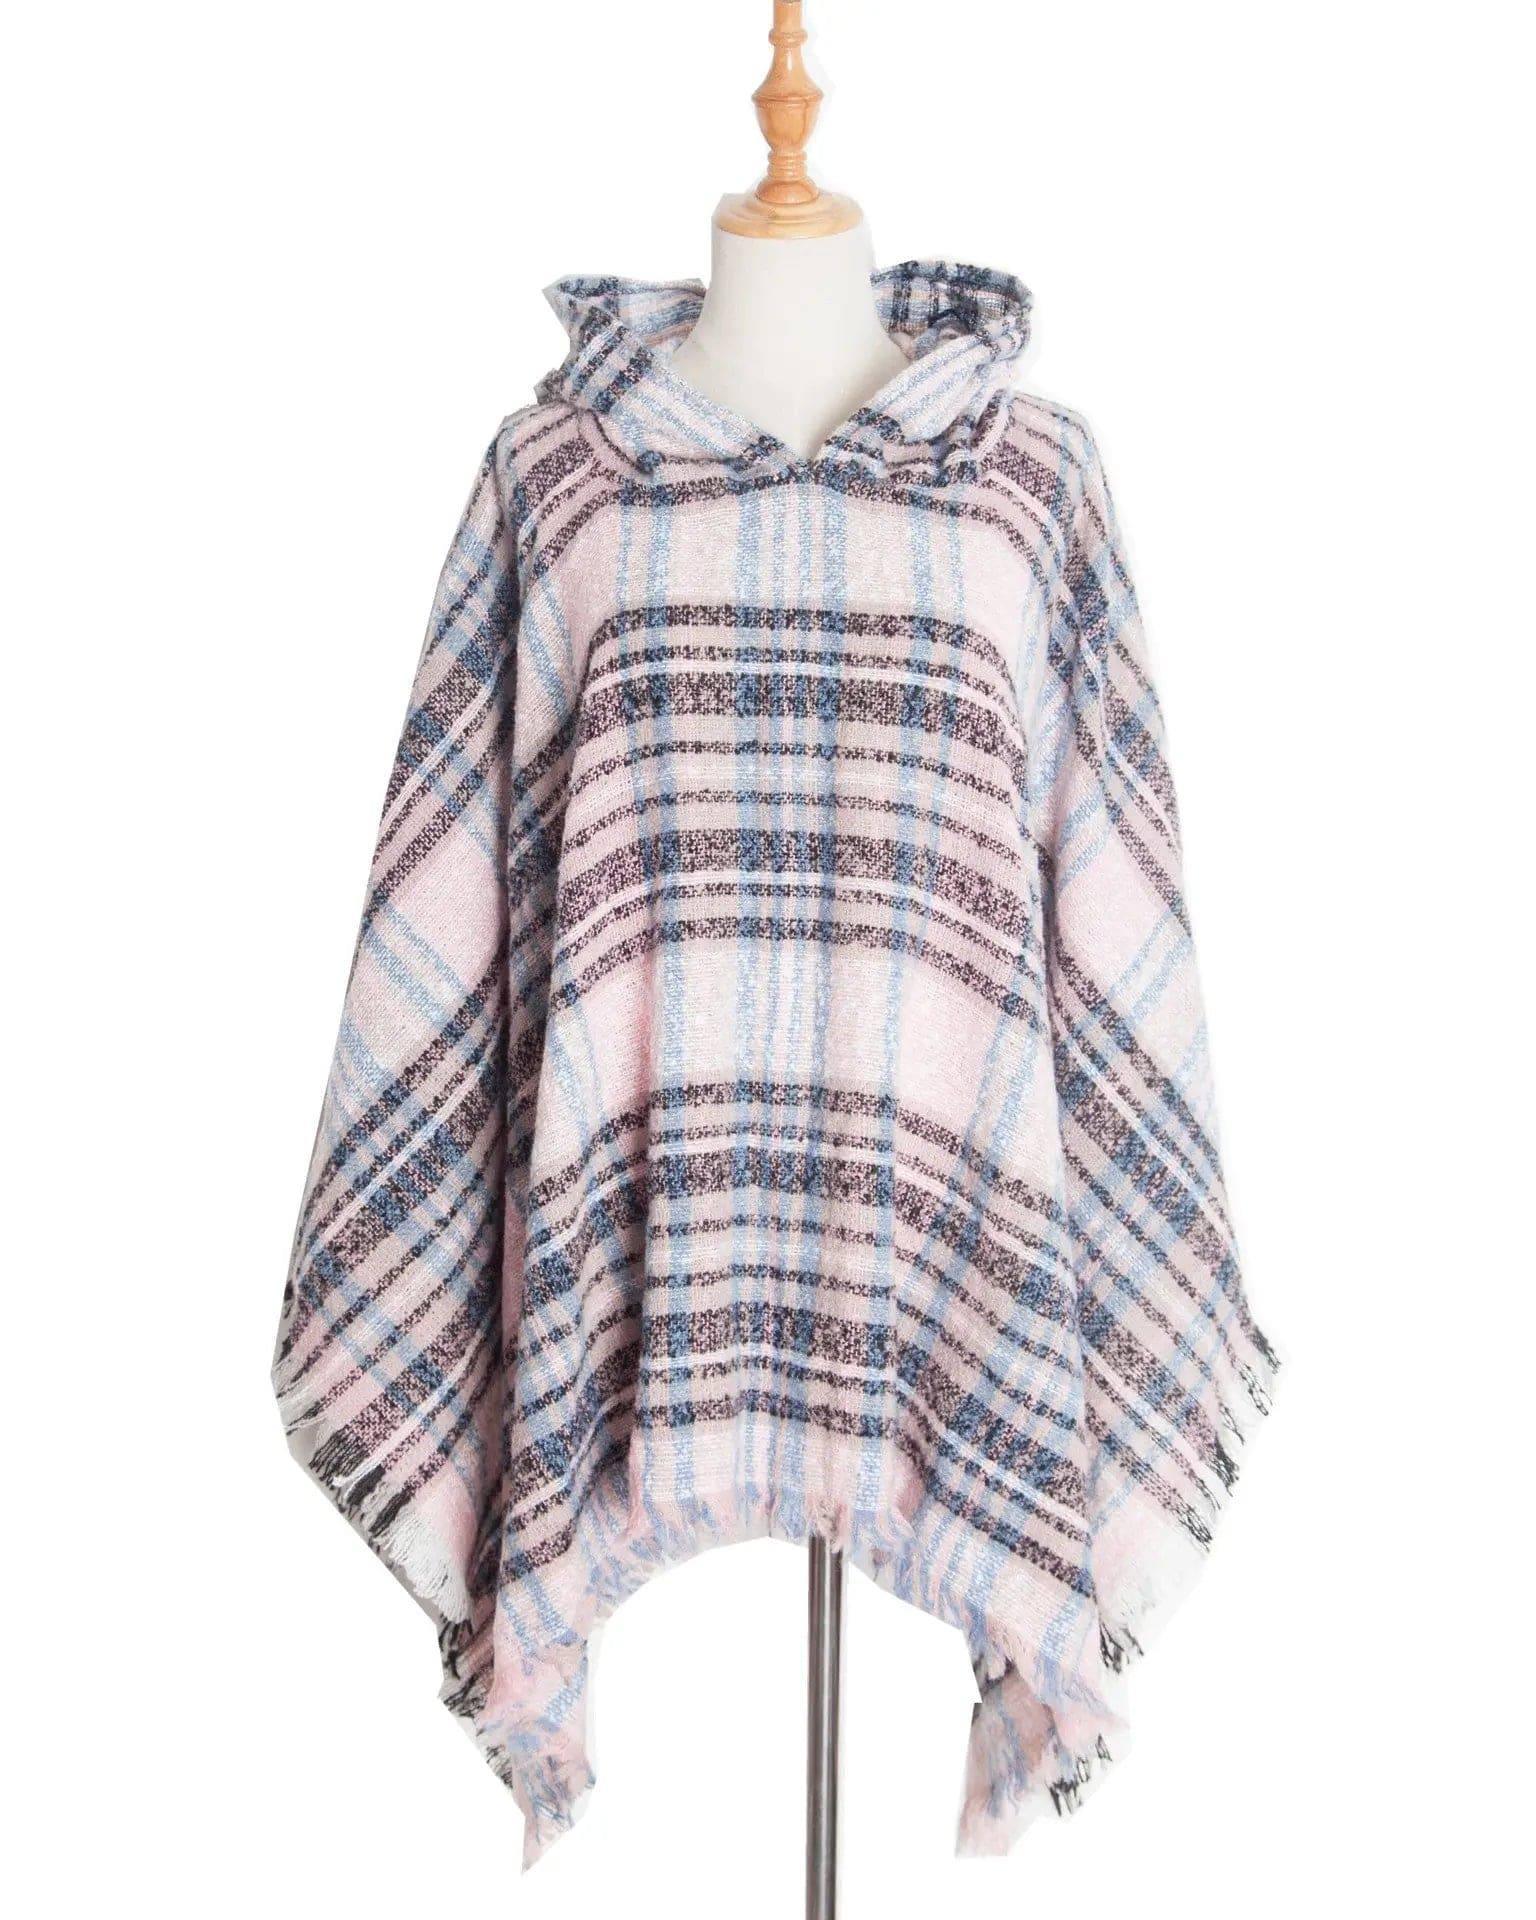 Spring Autumn And Winter Plaid Ribbon Cap Cape And Shawl-DP6 03 Pink-13